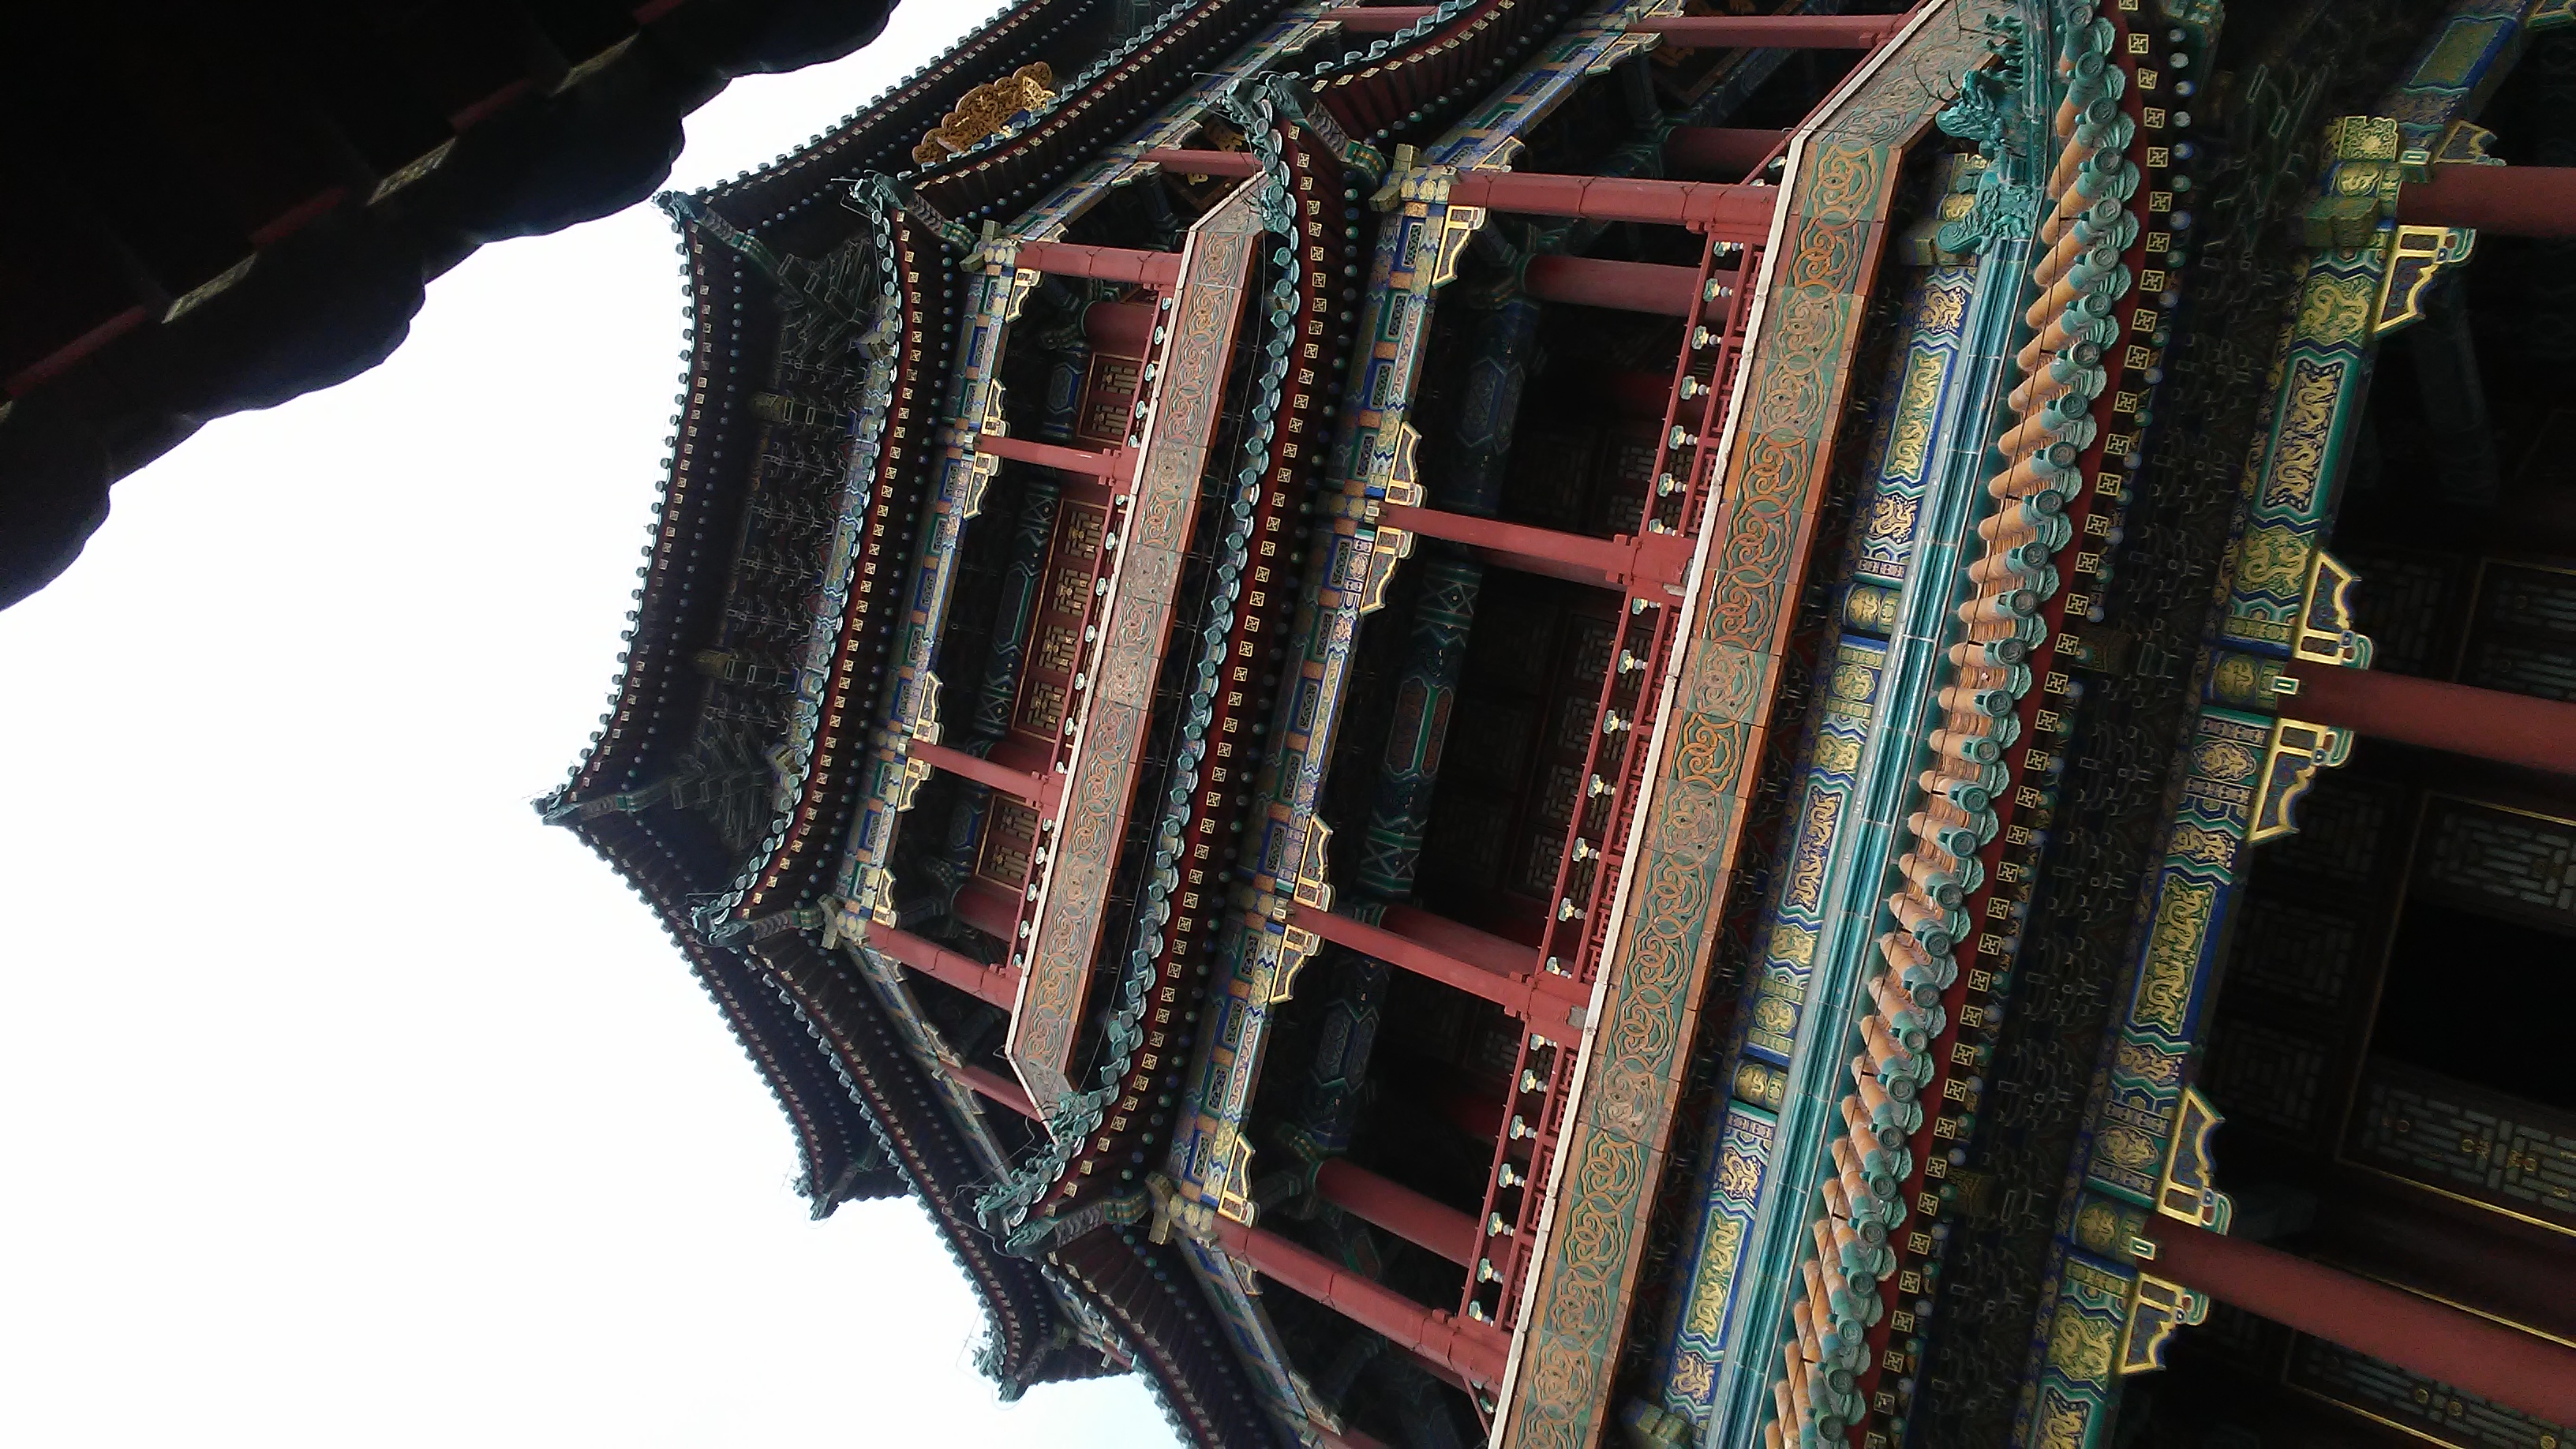 Image of the Summer Palace